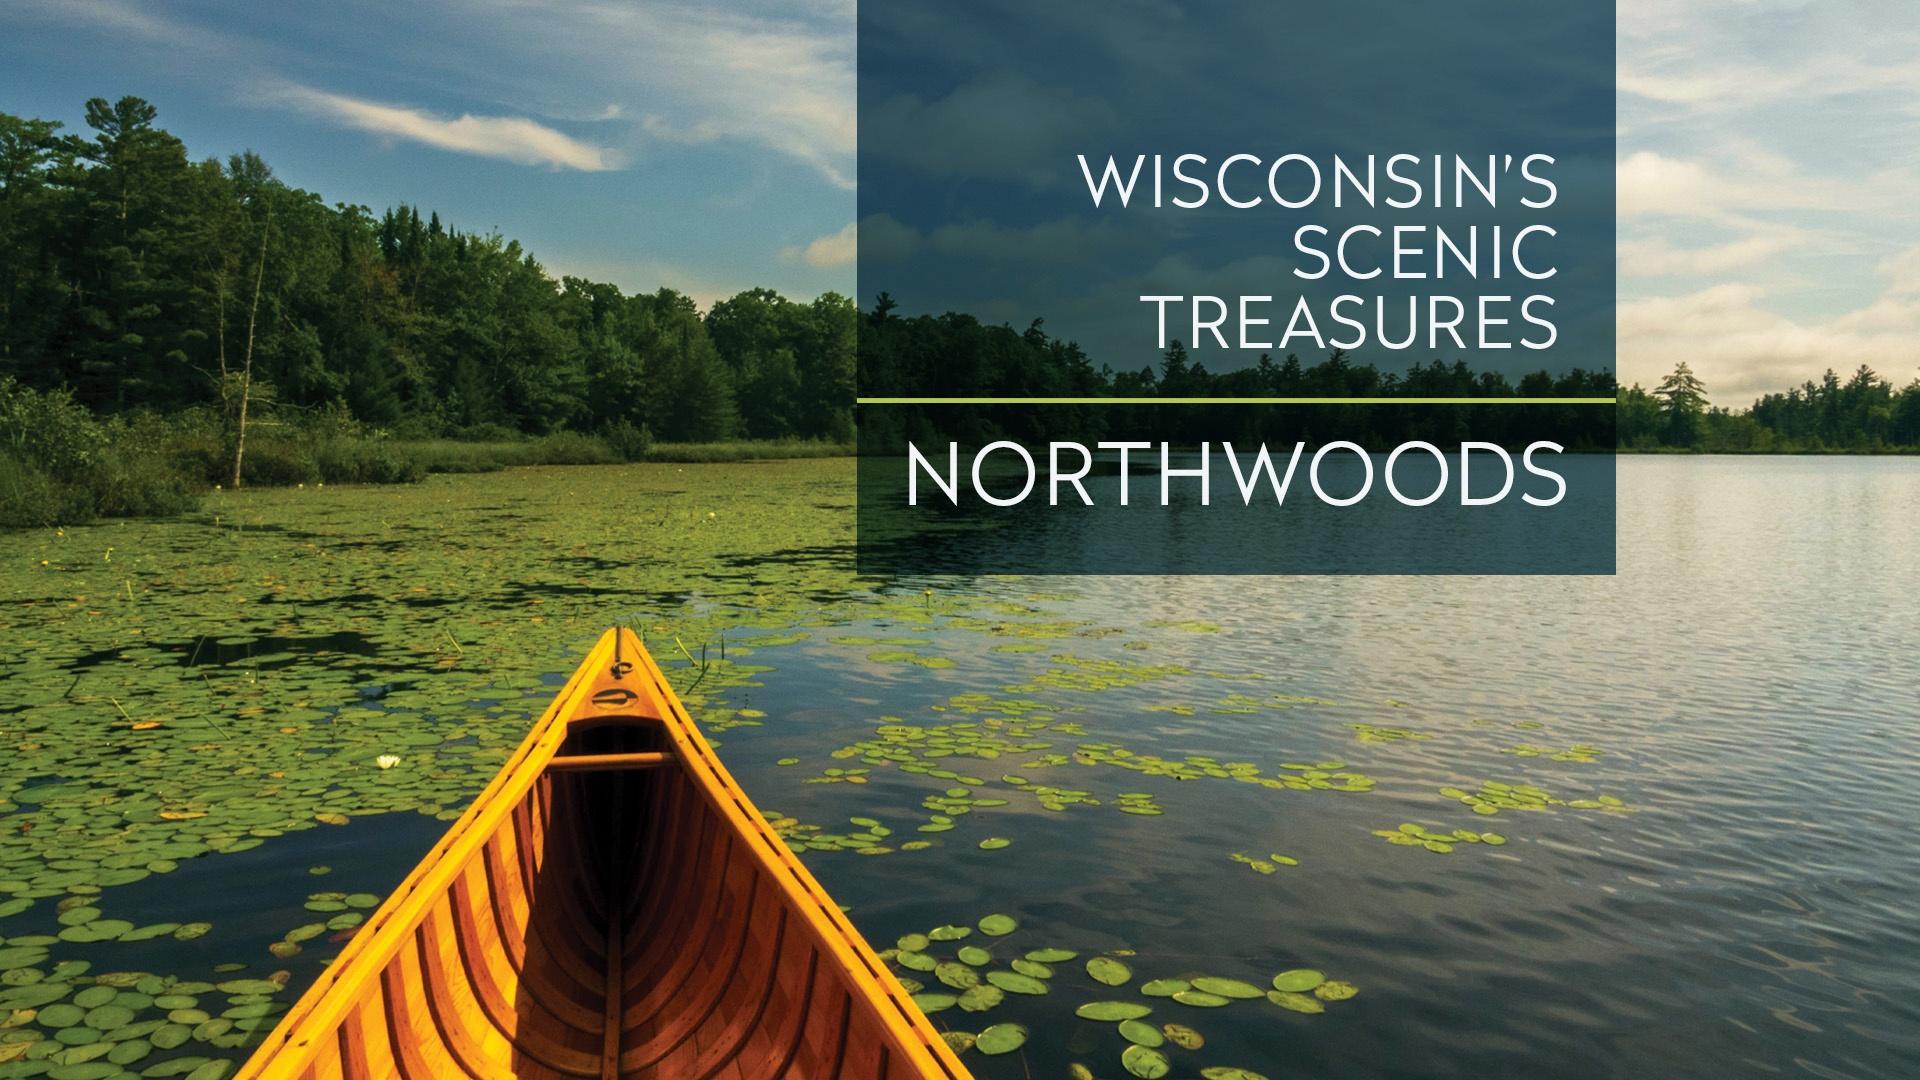 The title Wisconsin's Scenic Treasures: Northwoods on an image of a first-person perspective of canoe ride on a lake. Photo Credit: Jeff Trapp